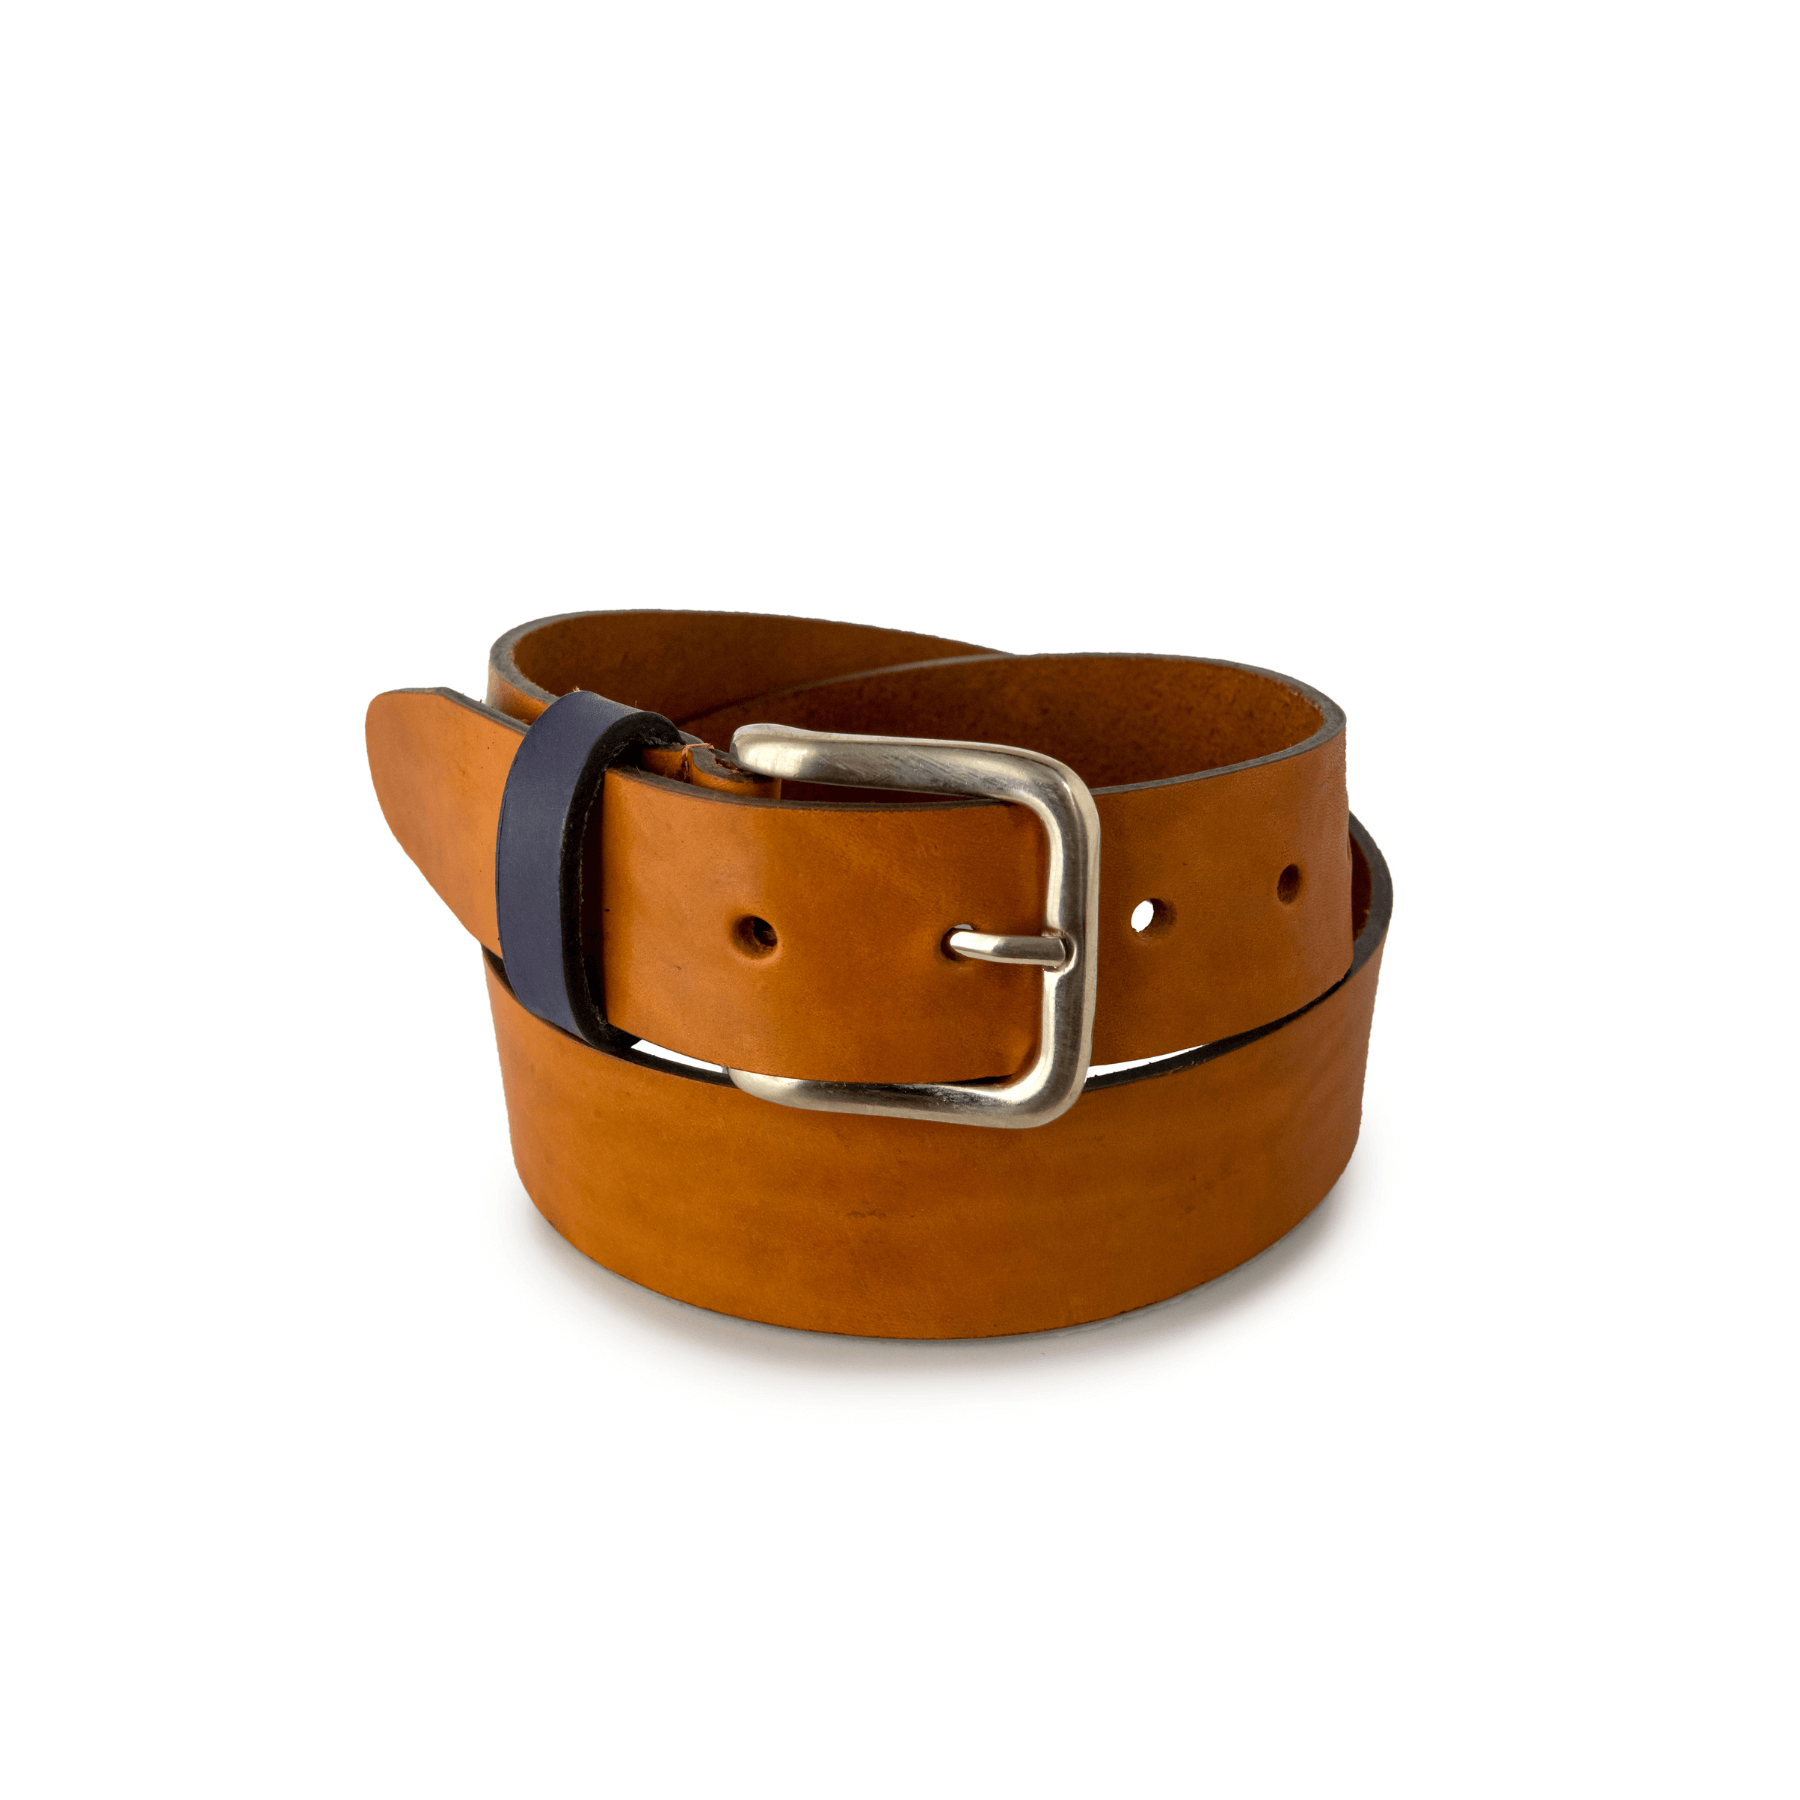 Gaucholife Belts Vegetable-Tanned Leather Polo Belt (Tan)